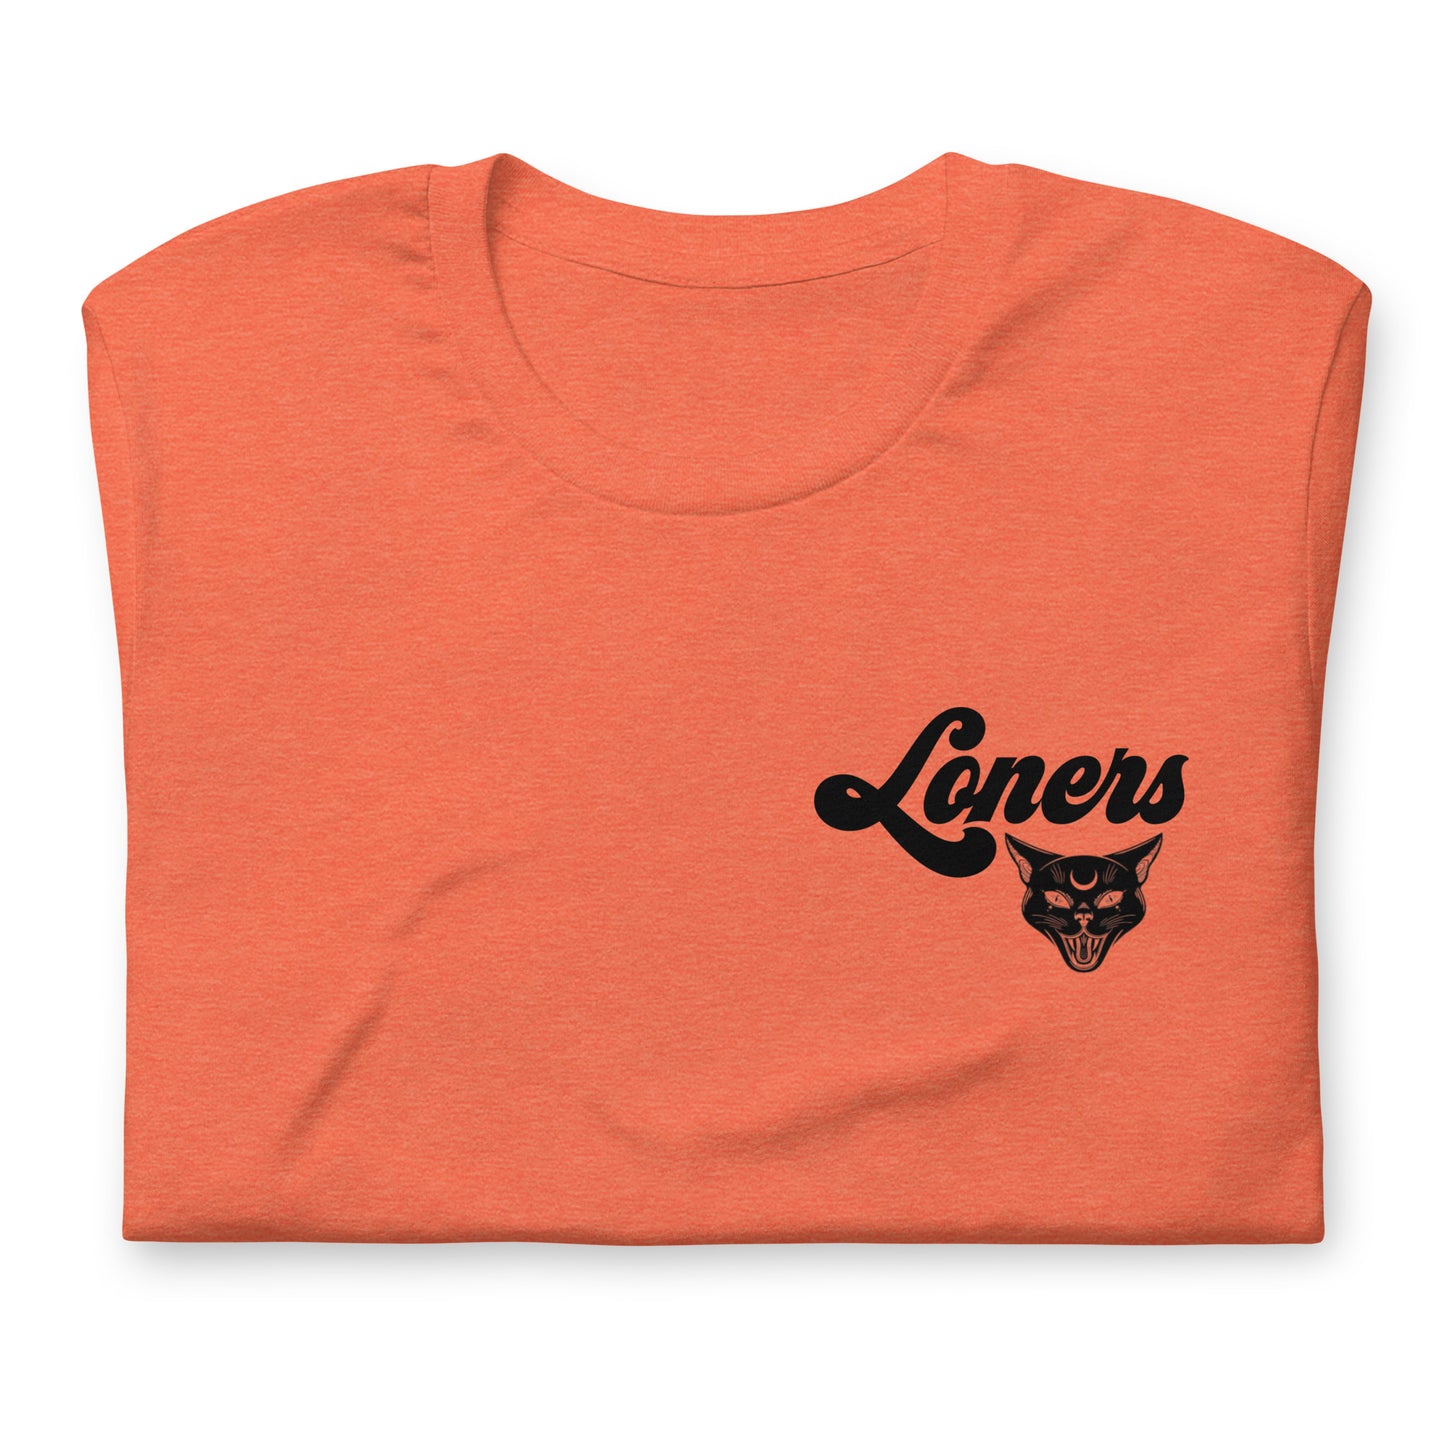 Loners Color Tee